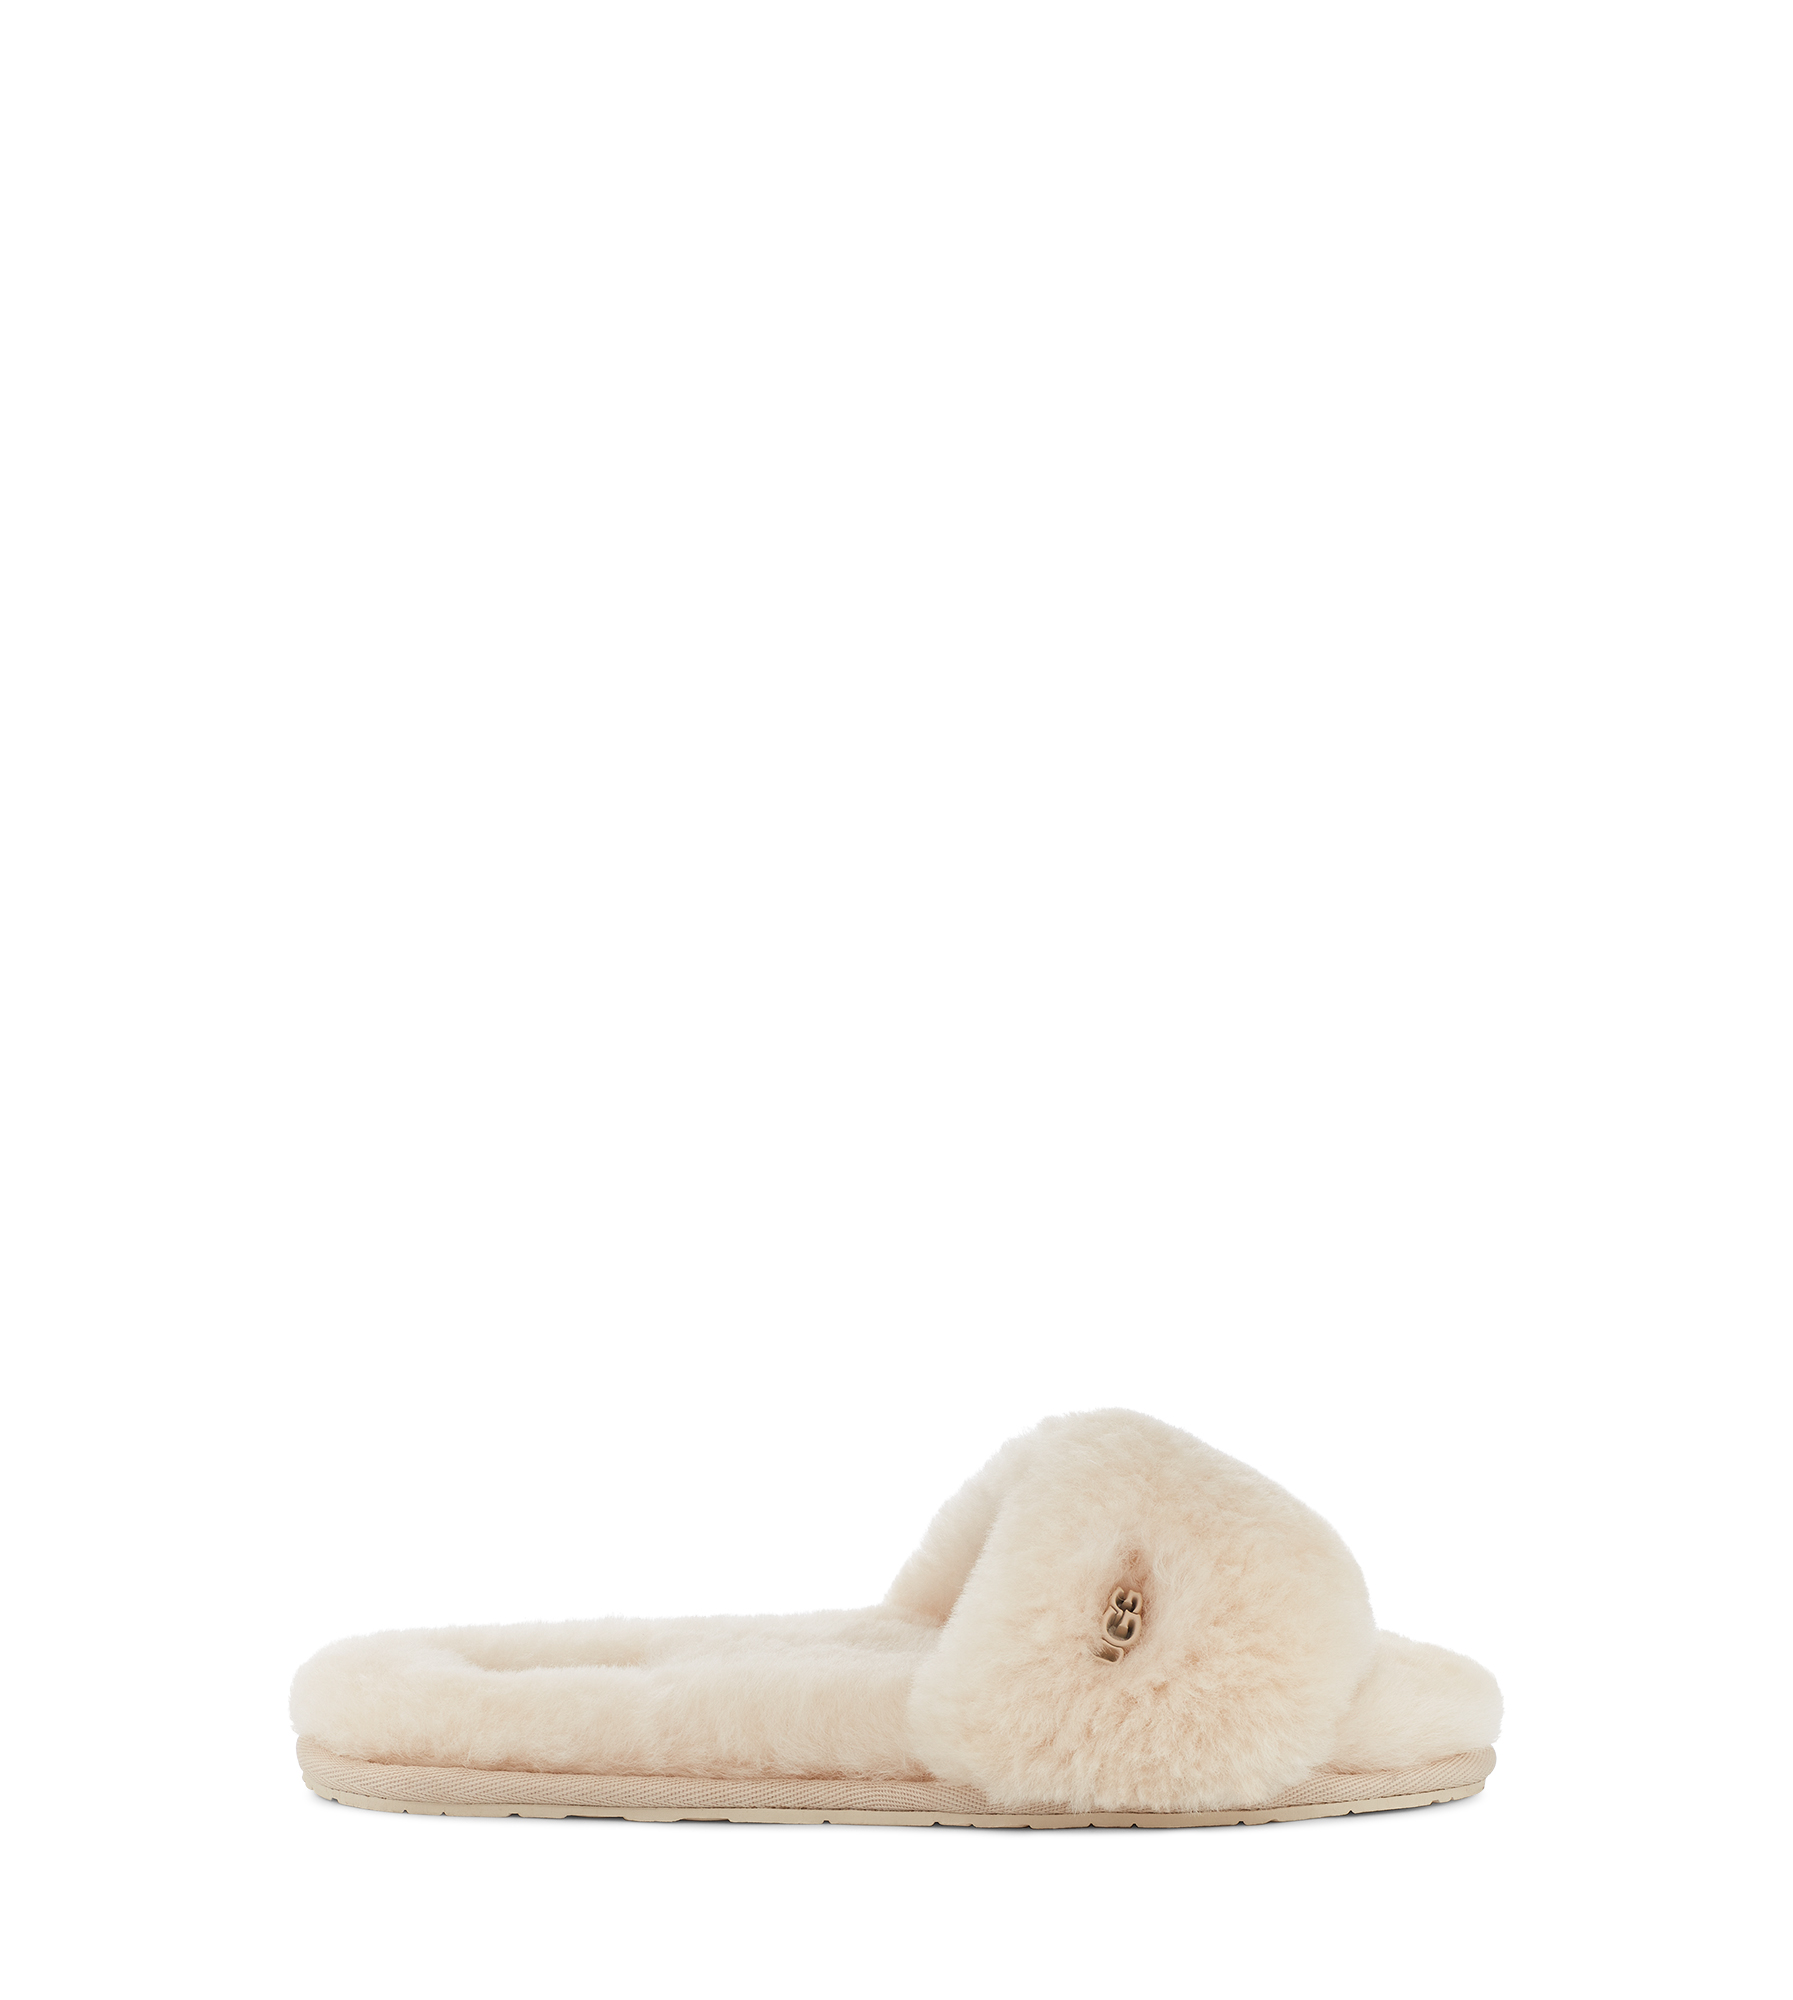 Fluff Slide Chaussons in White, Taille 38